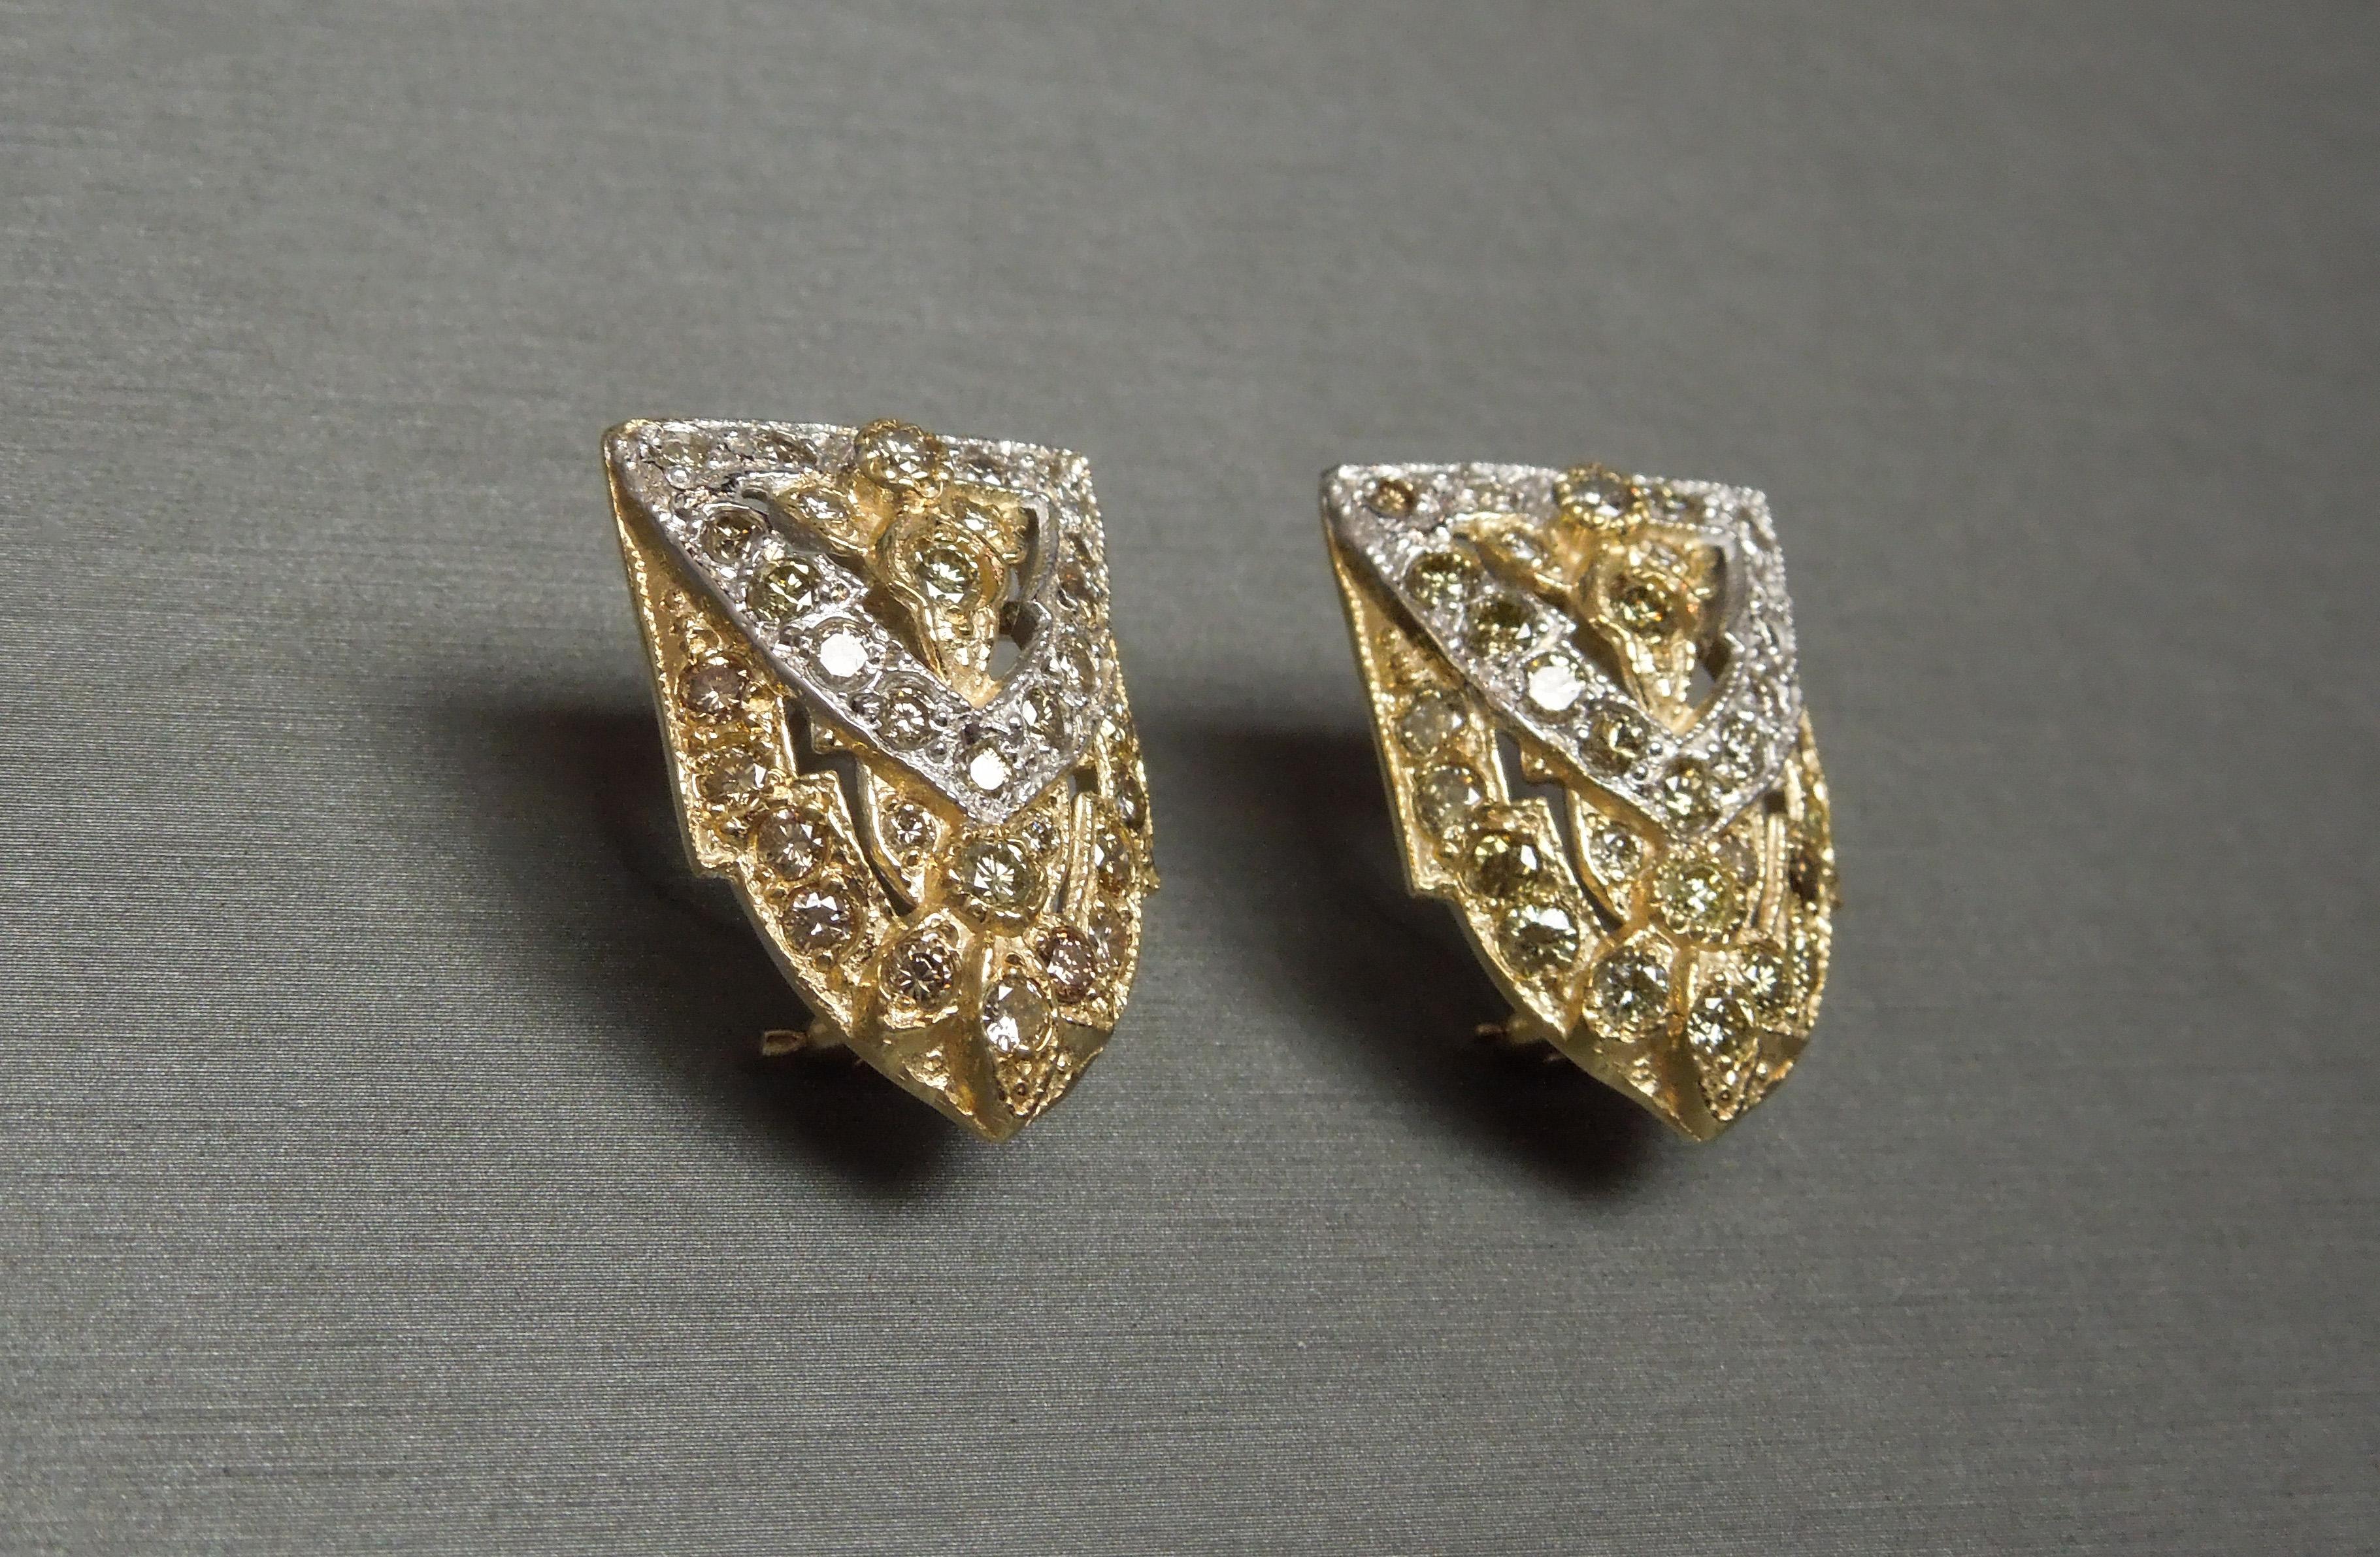 In a Cathedral Art Deco period inspired design, these 14K Diamond Shield Earrings contain a total of 3.85 carats of Nearly Flawless [Natural] Fancy Colored Round Brilliant cuts - consisting of a Green, Cognac & Champagne ranking a VVS2-SI2 Clarity,